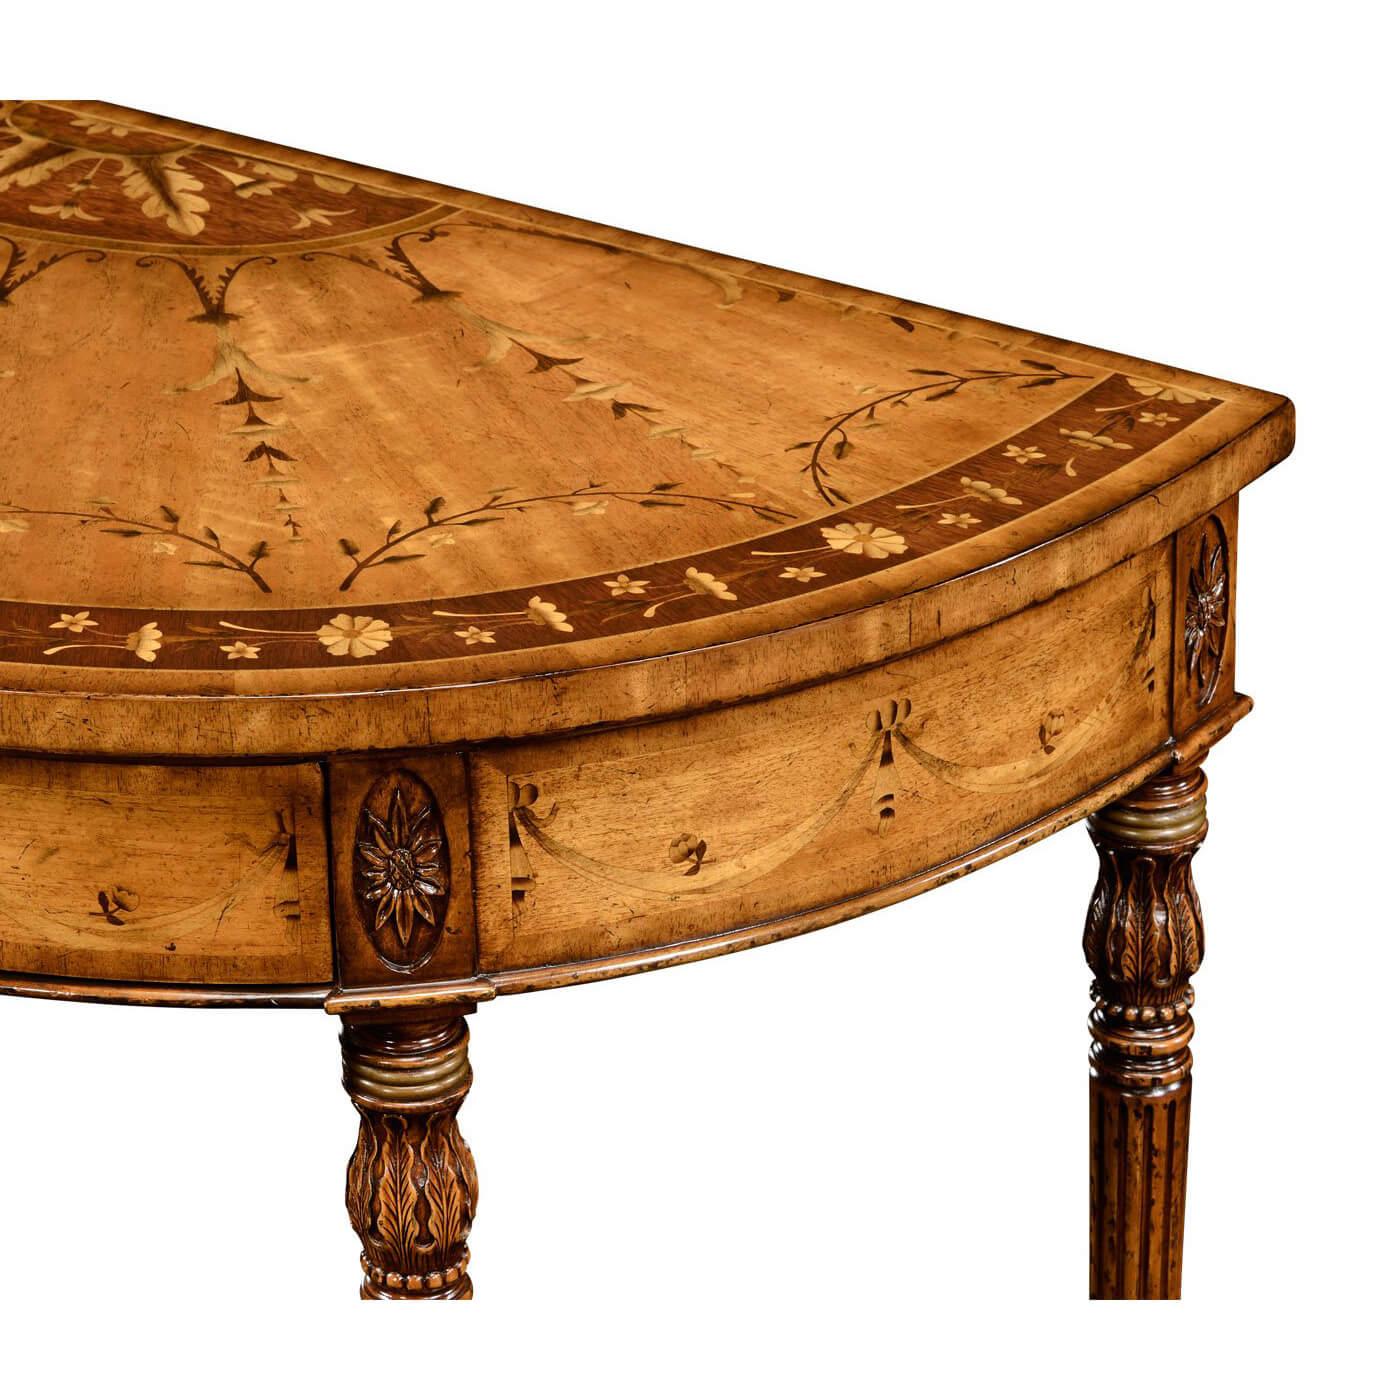 George III Adam style satinwood and walnut demilune console with fine marquetry inlay of swags and leaves, one drawer with oak secondary wood, matching swag handles, and carved paterae to the top of the tapering fluted legs. After a design of circa